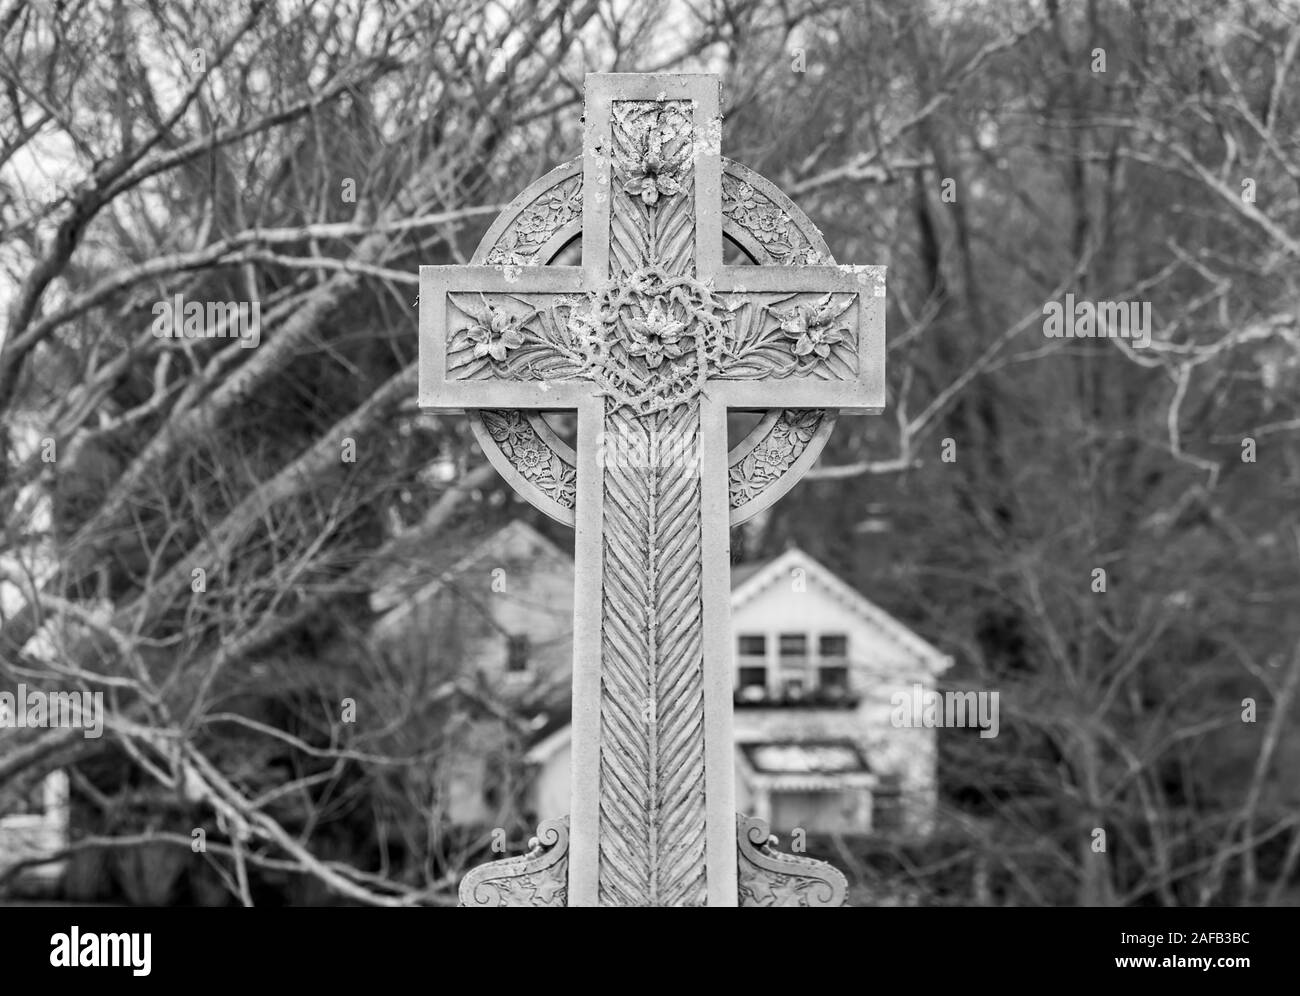 large ornate stone cross in a cemetery Stock Photo